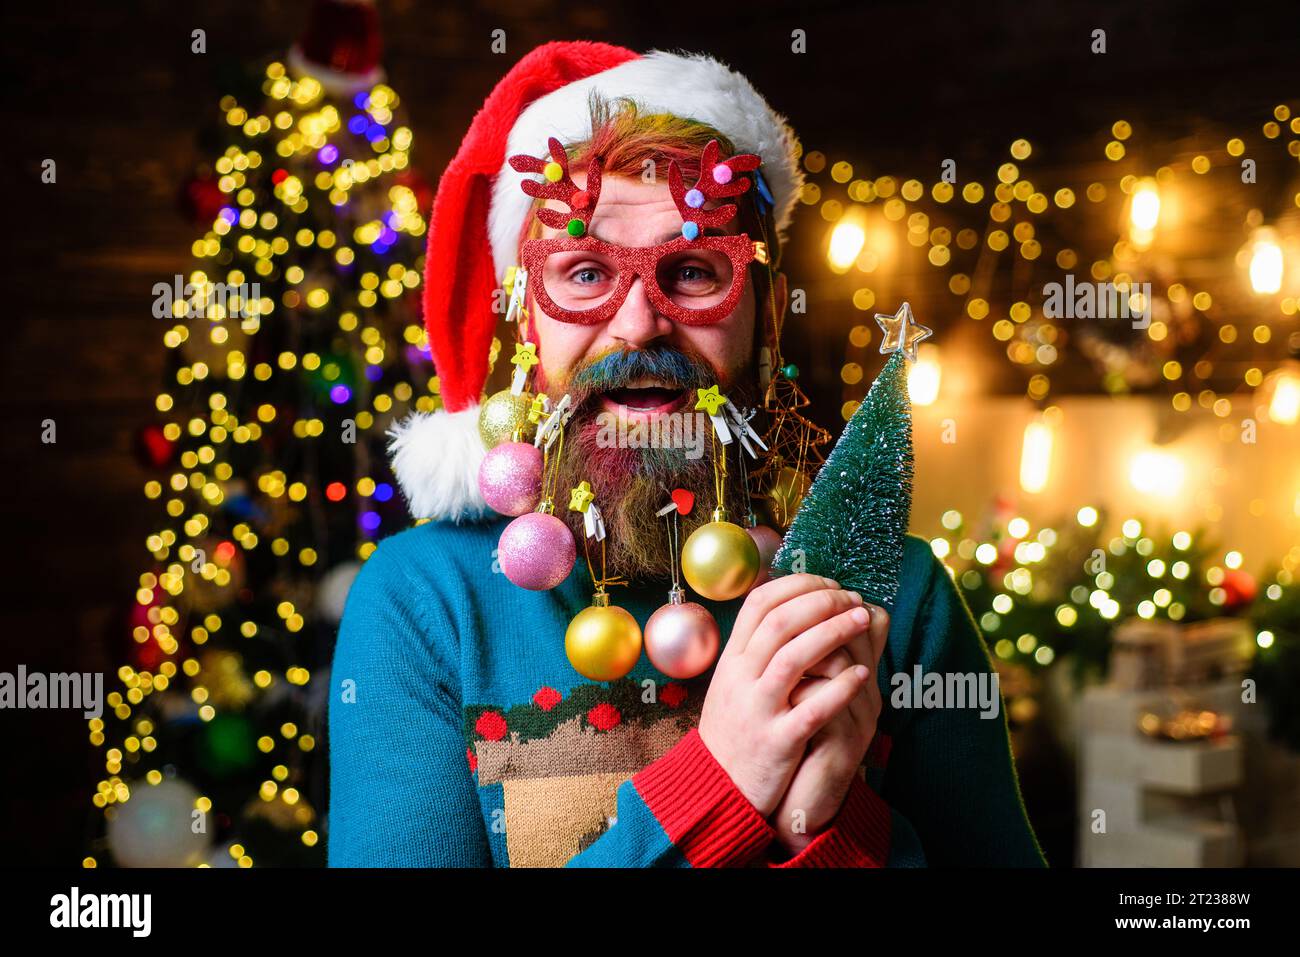 Merry Christmas and Happy New year. Smiling man in Santa hat with decorated beard holds small Christmas tree. Christmas beard style. Bearded Santa Stock Photo